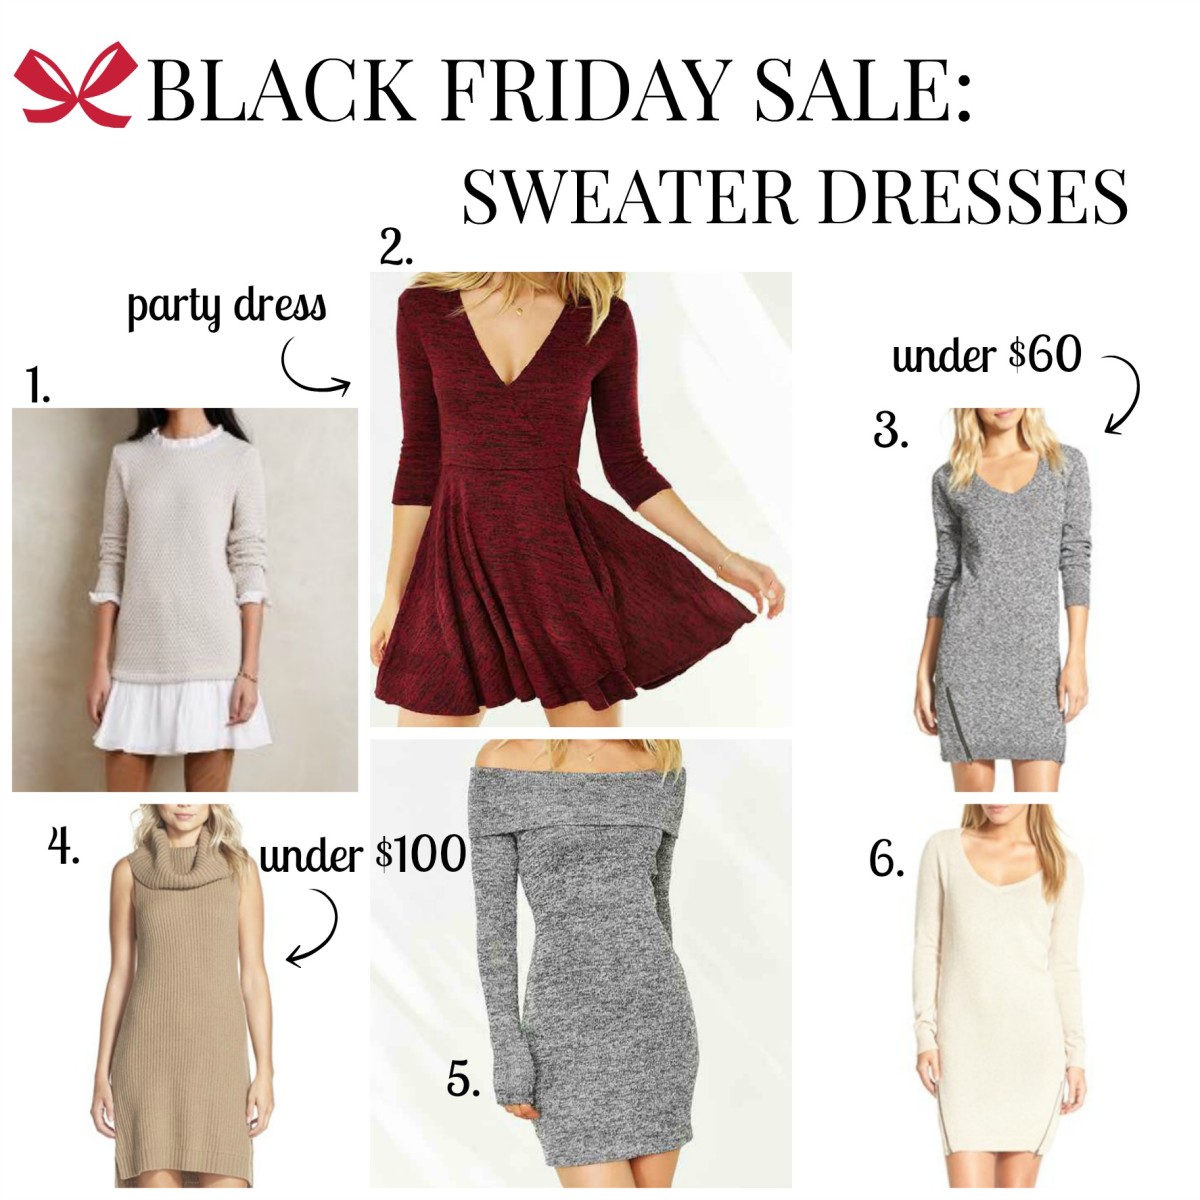 Black Friday Sale Sweater Dresses - Airelle Snyder